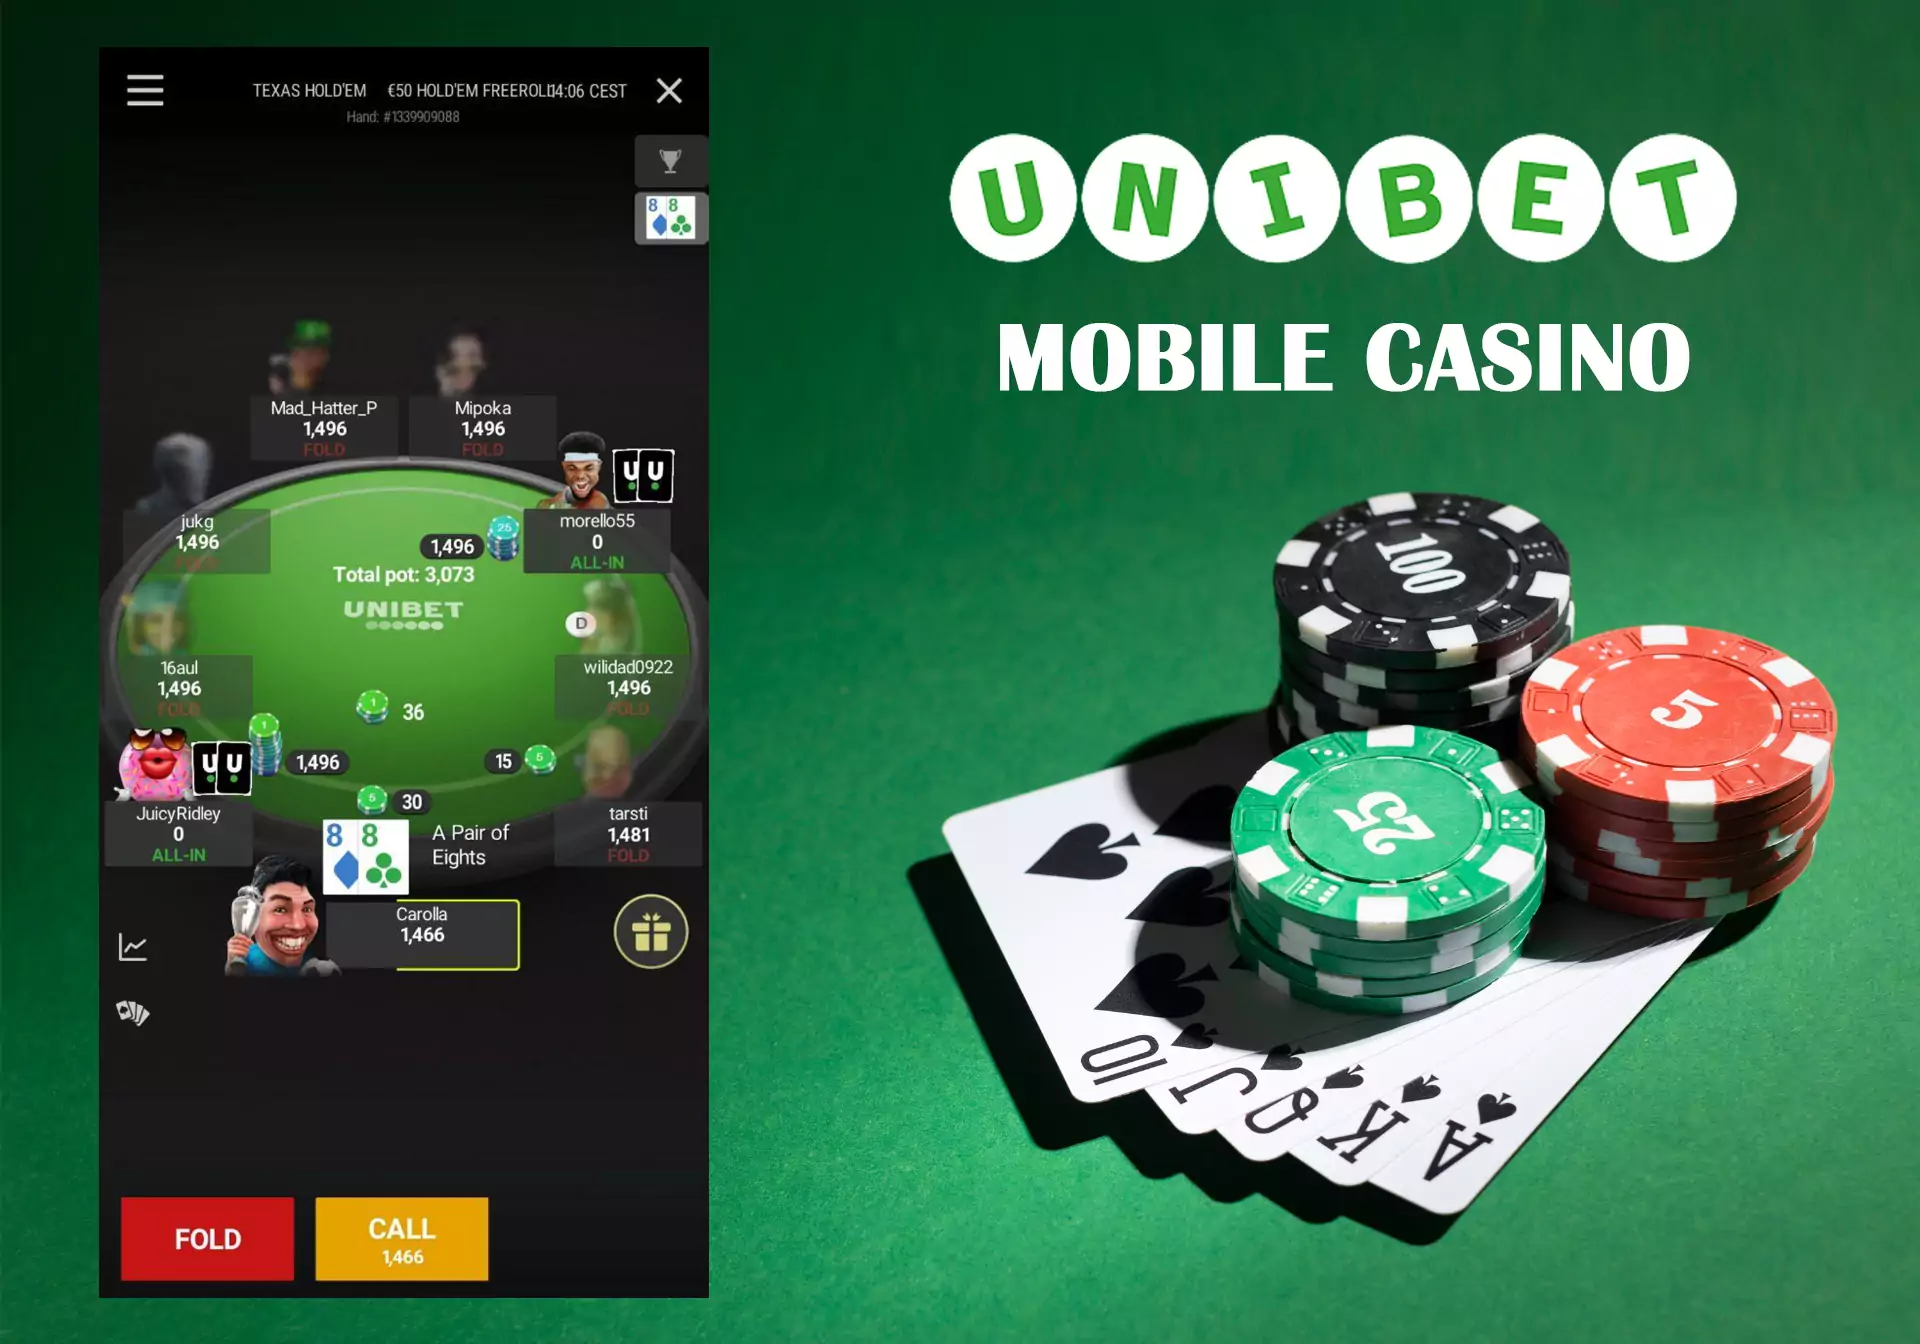 In the mobile casino, players can find slots, table games, lotteries, and jackpots.